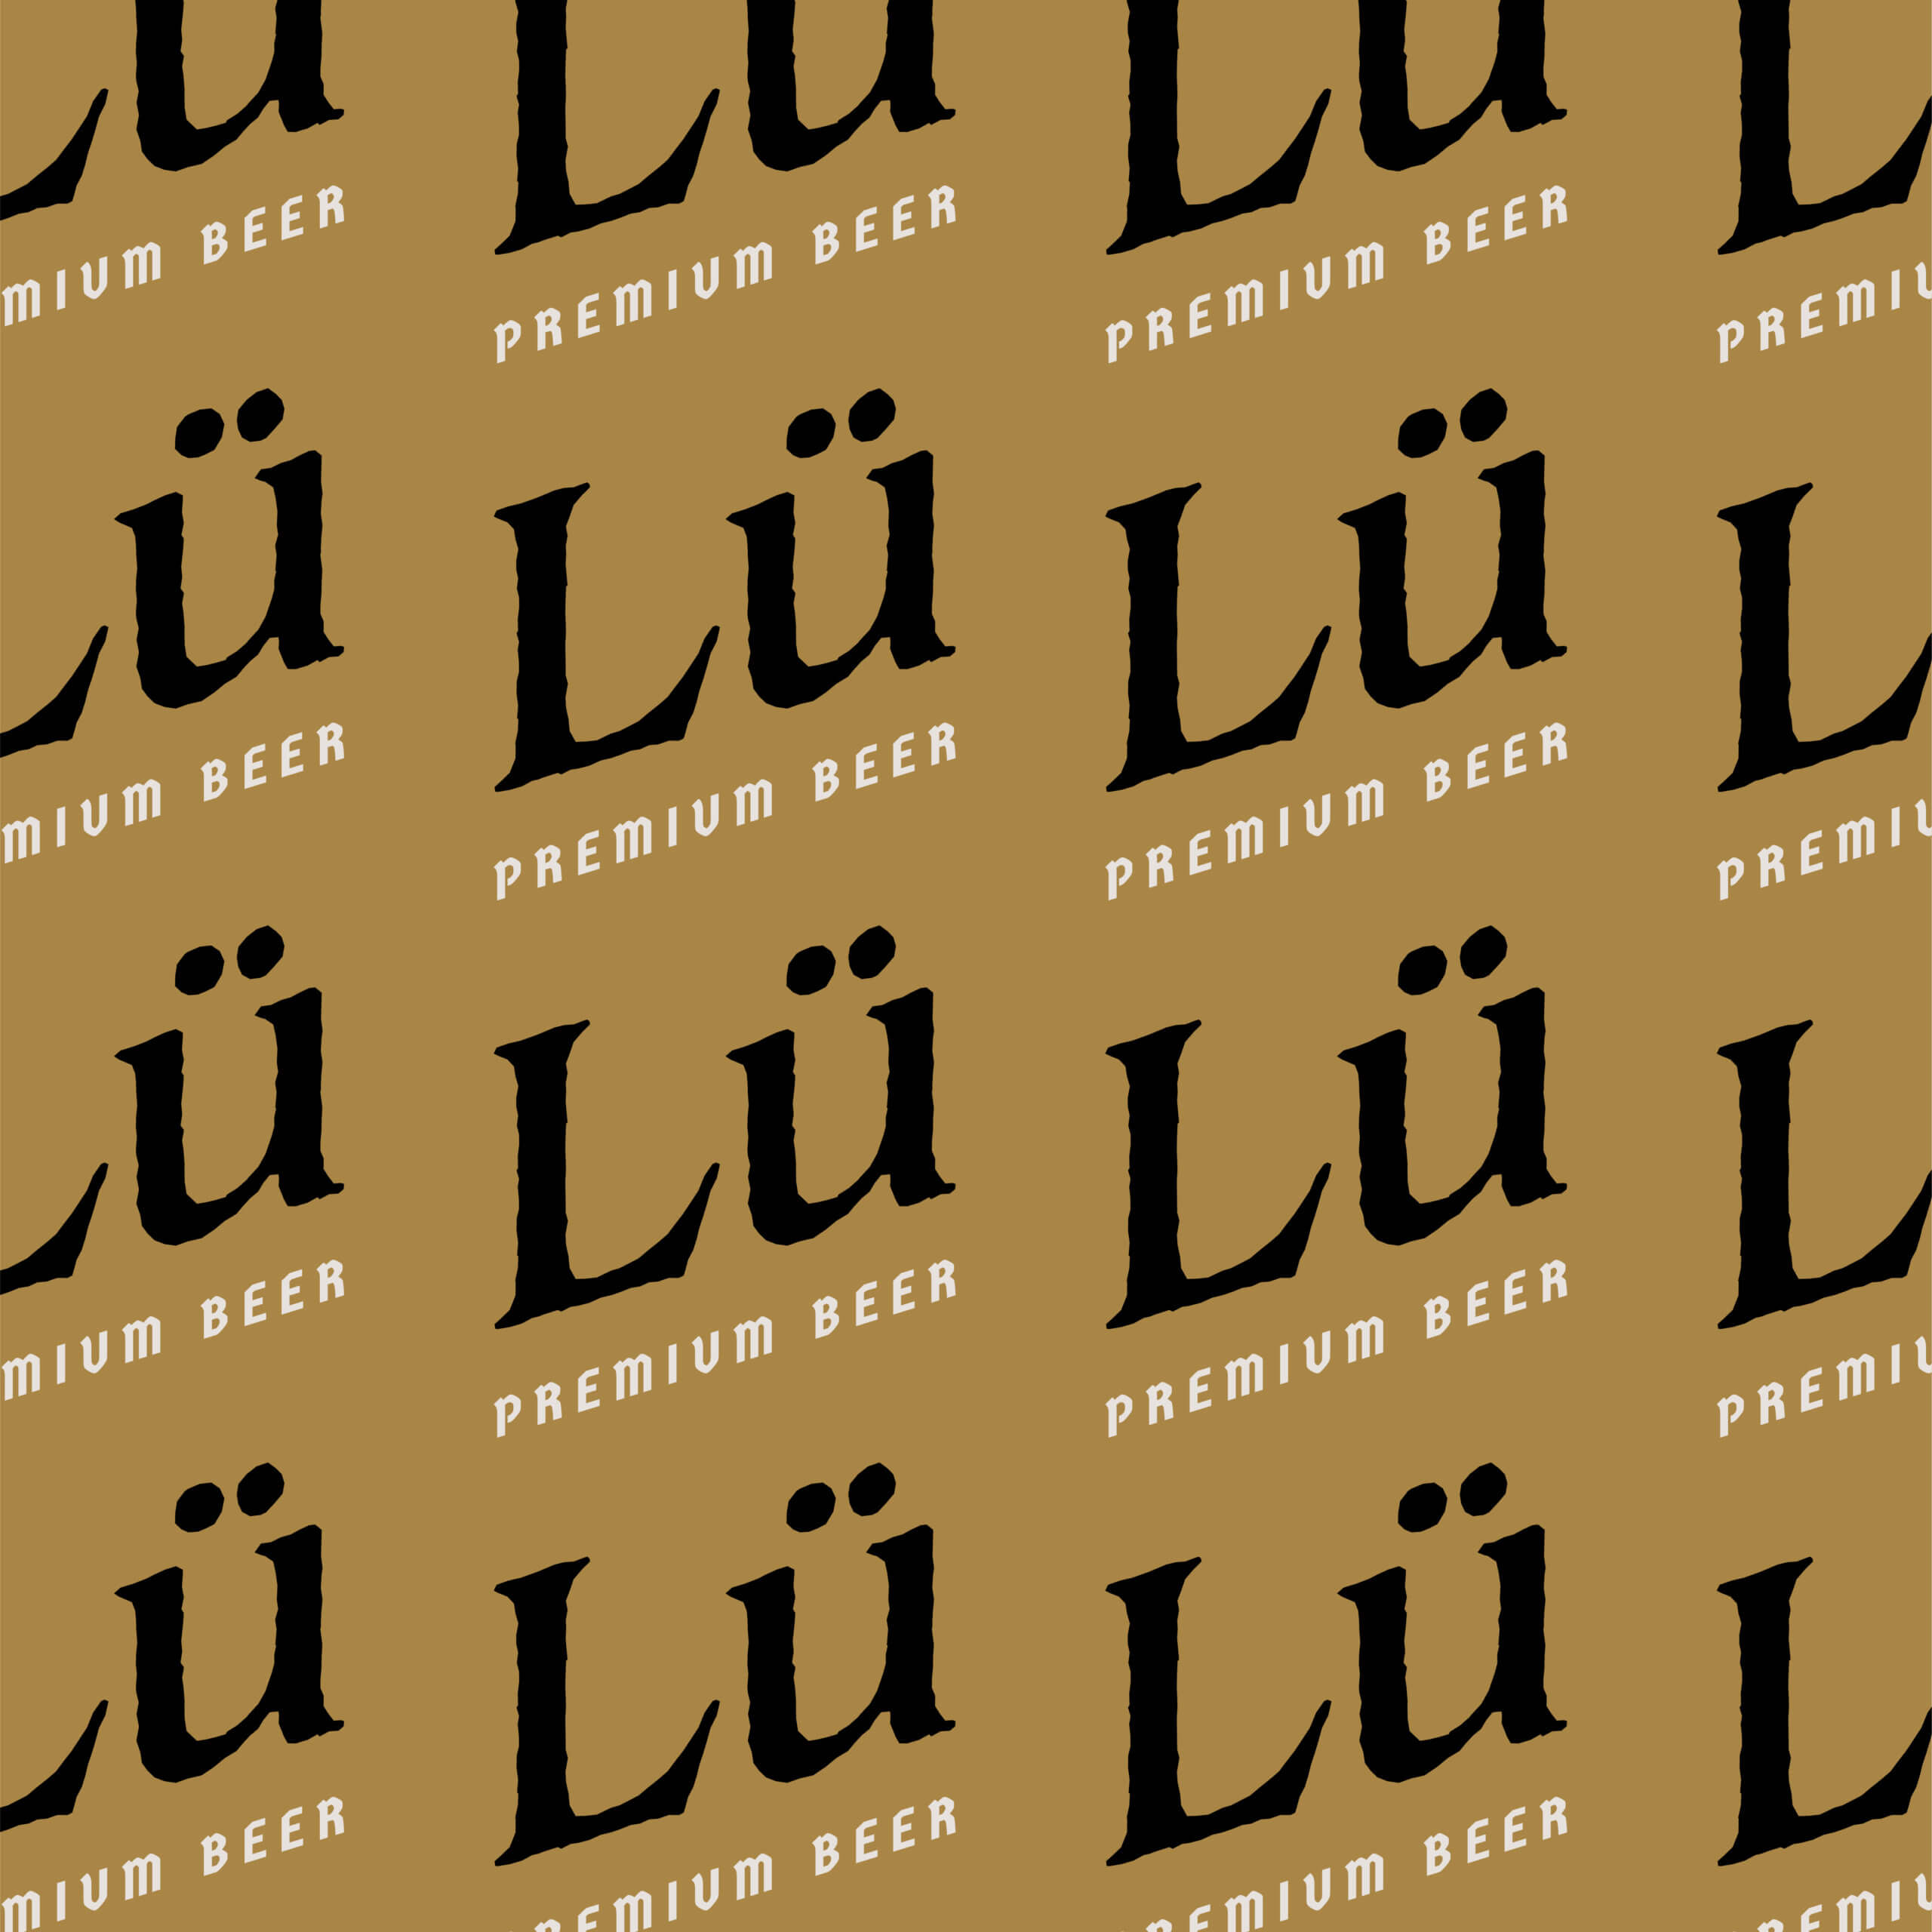 Stout Collective Website – Solemn Oath Brewery Flagship Rebrand Photo 3. Lü Pattern.